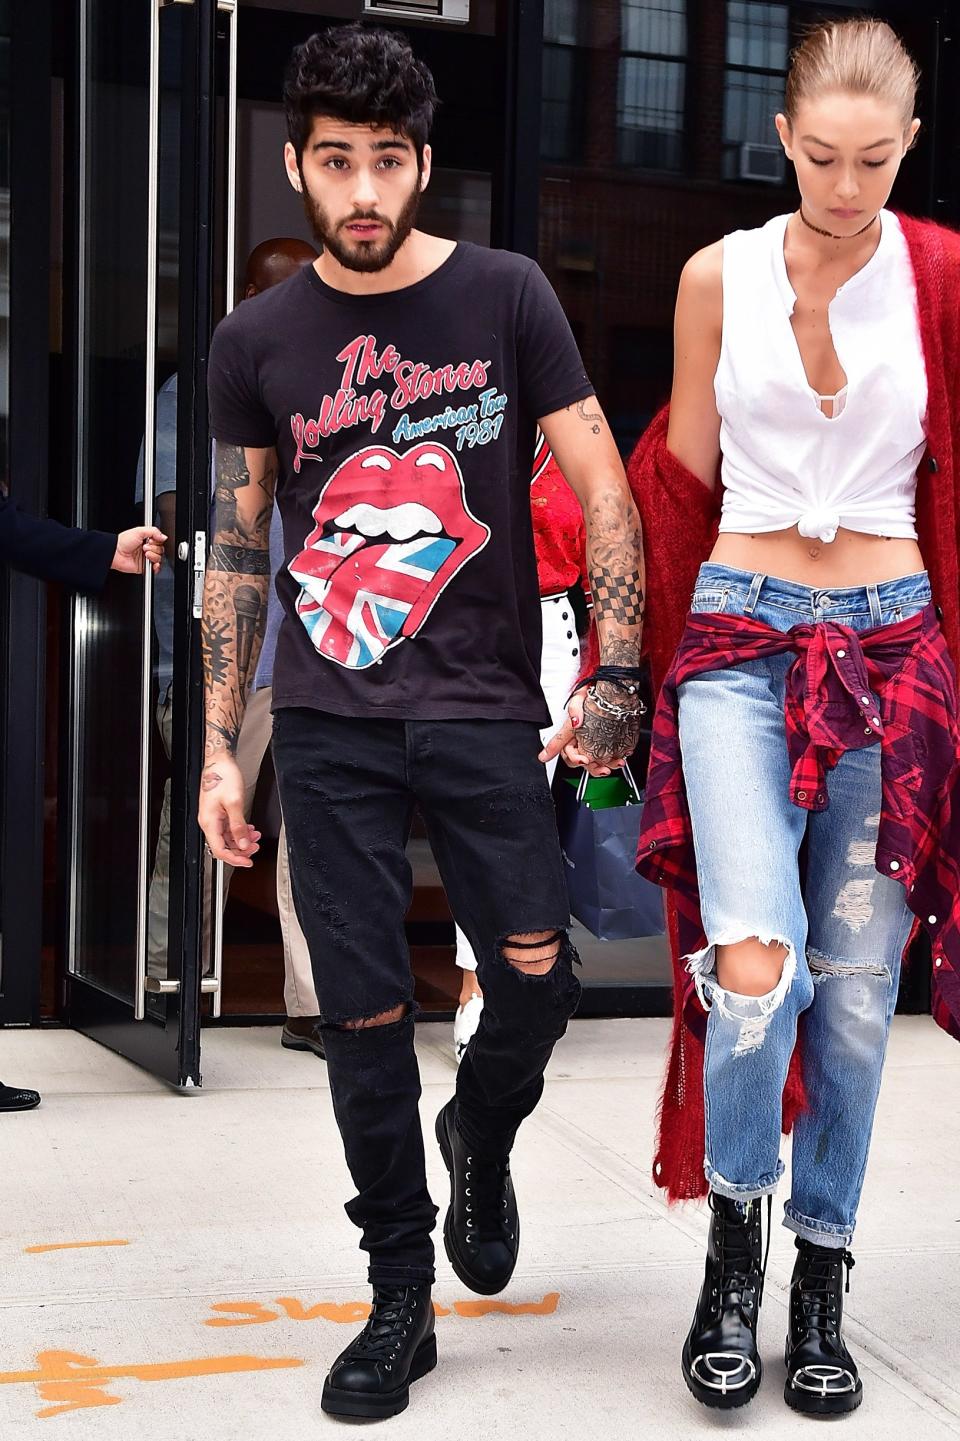 <p><b>This shaggy, scruffy look suits the Rolling Stones tee and tattoo sleeves.</b></p>